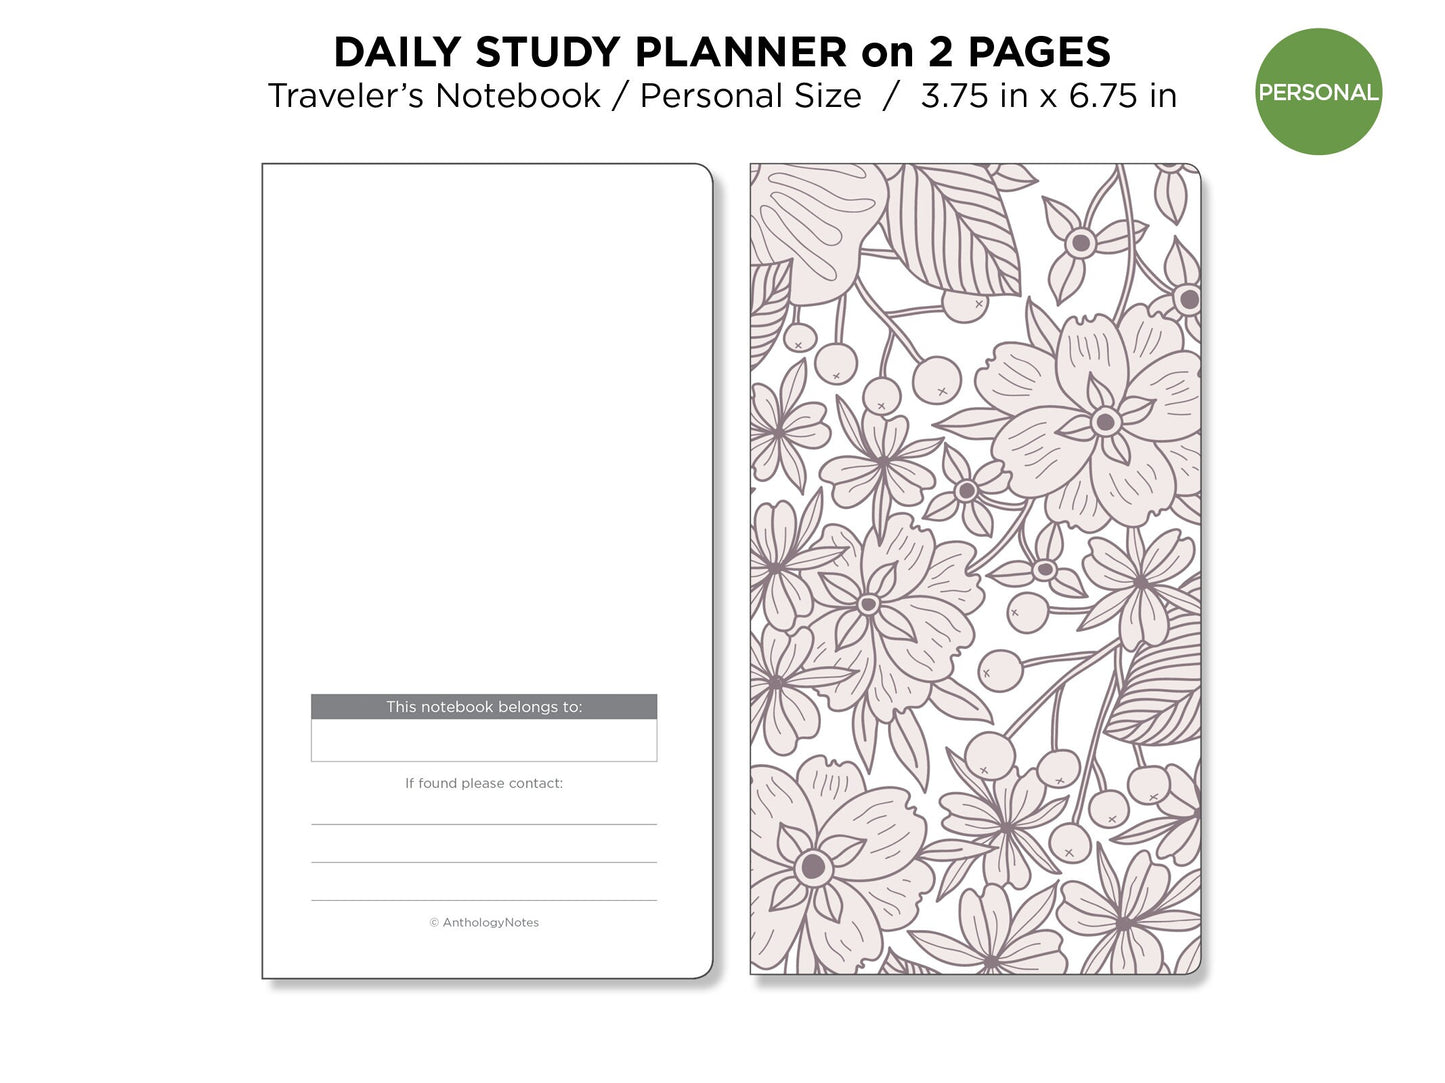 STUDY Planner Daily View on 2 Pages PERSONAL Size Traveler's Notebook Printable Planner Insert